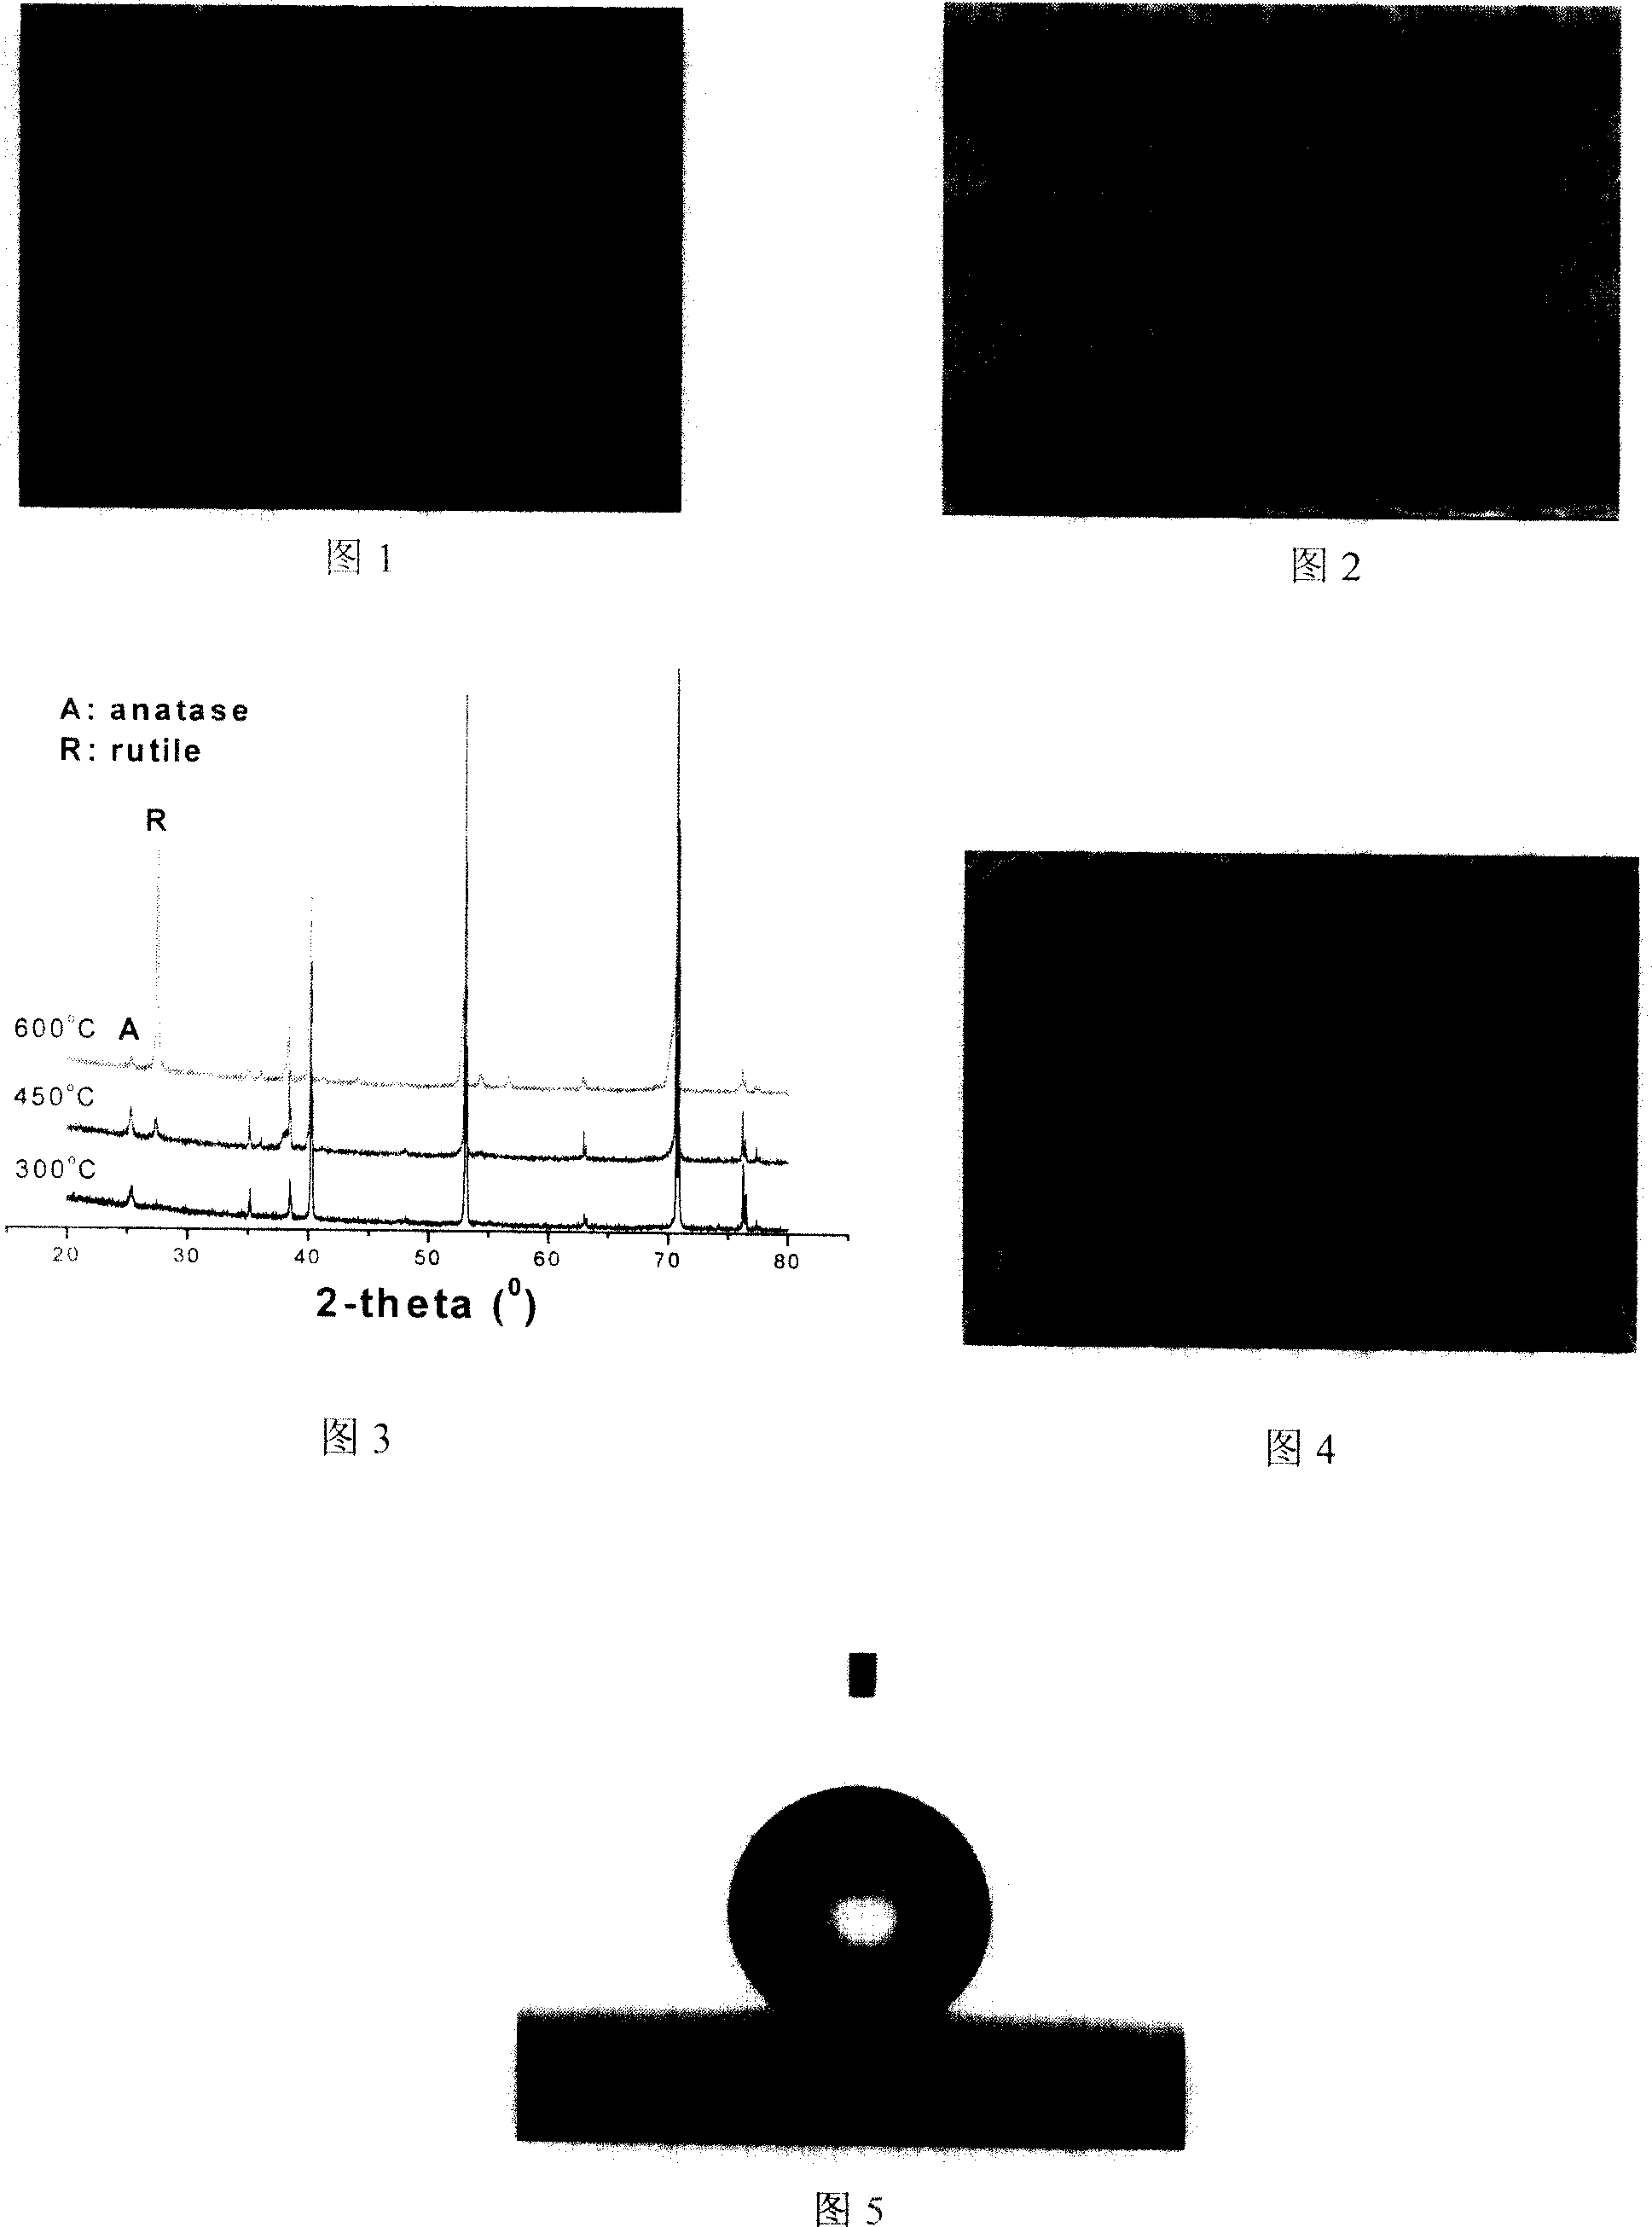 Construction method of titanium surface micrometre-grade pattern based on ultra-hydrophilic/ultra-hydrophobic characteristic